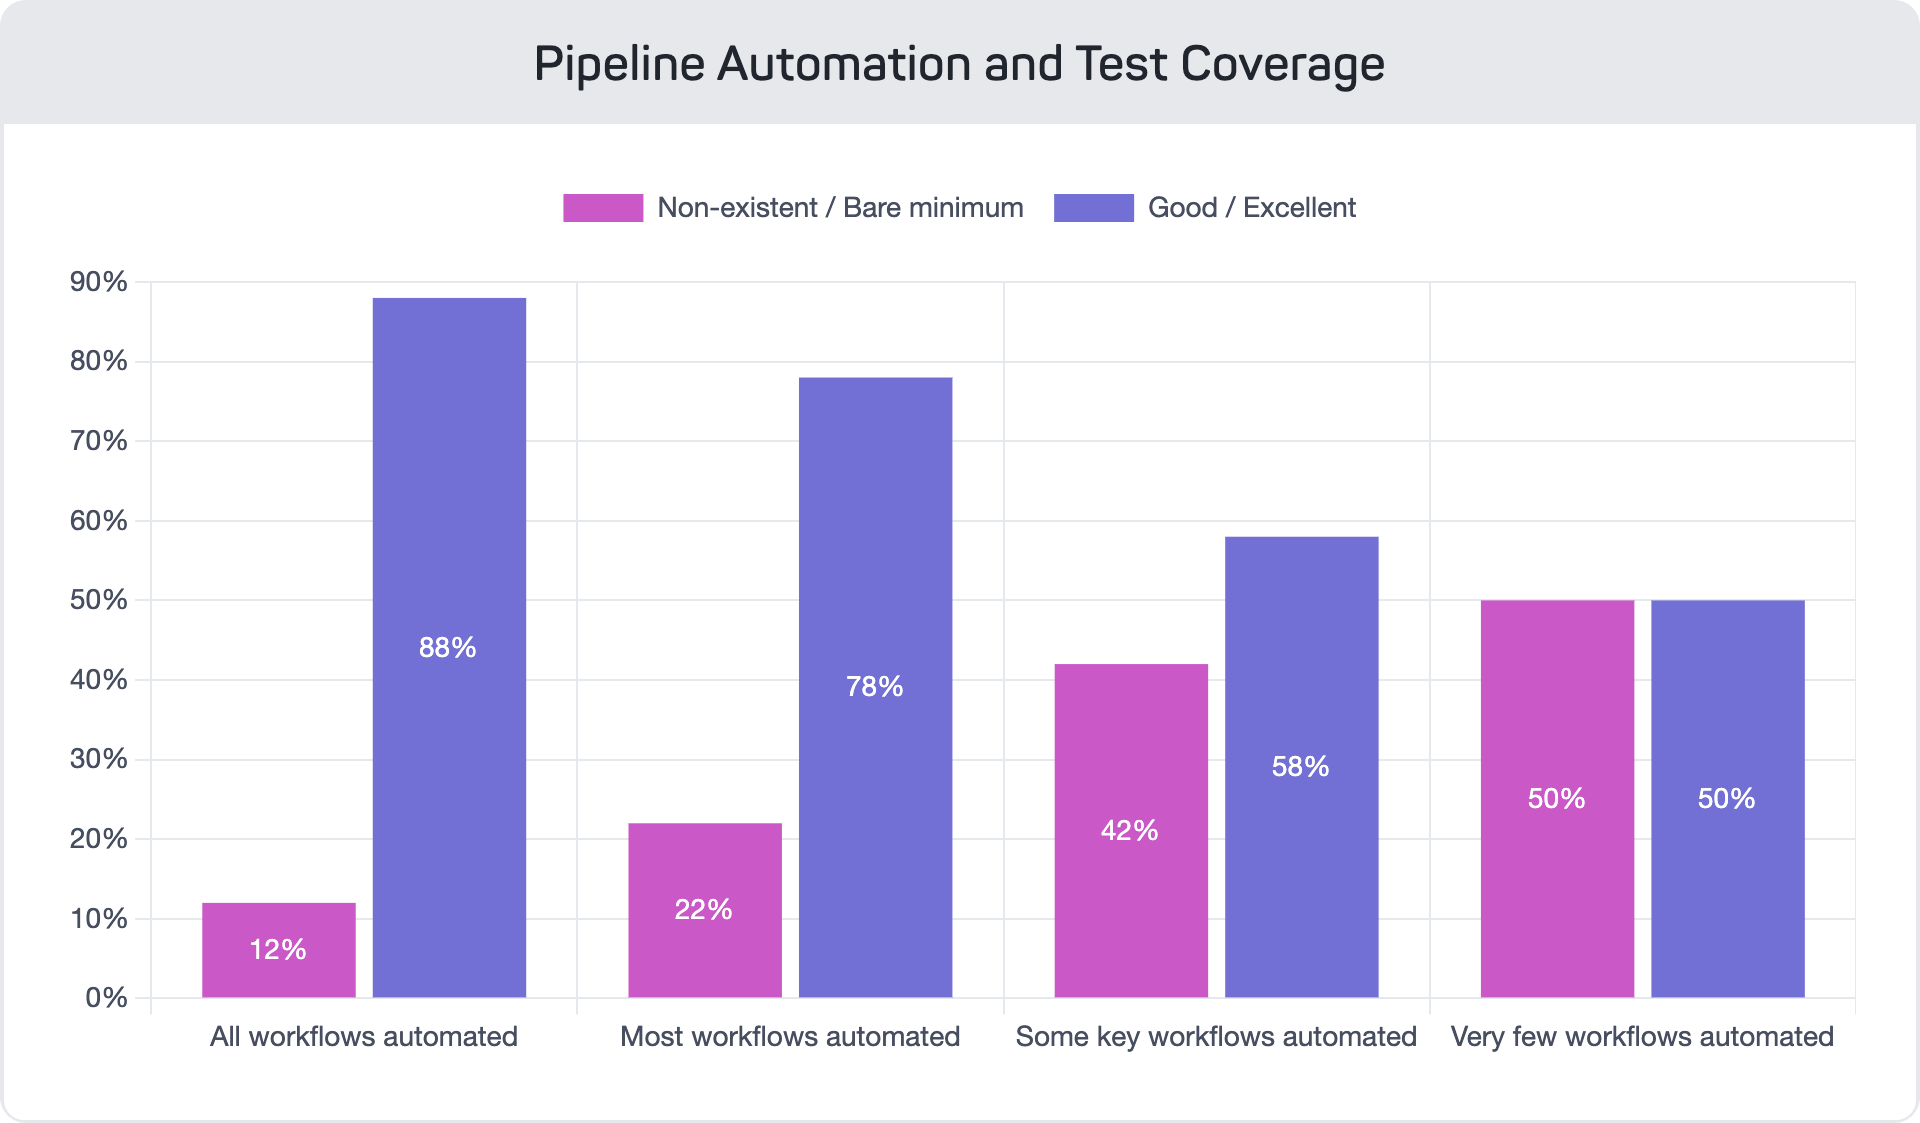 Pipeline-Automation-and-Test-Coverage_mabl-devops-report-2022_17NOV2022 (6)